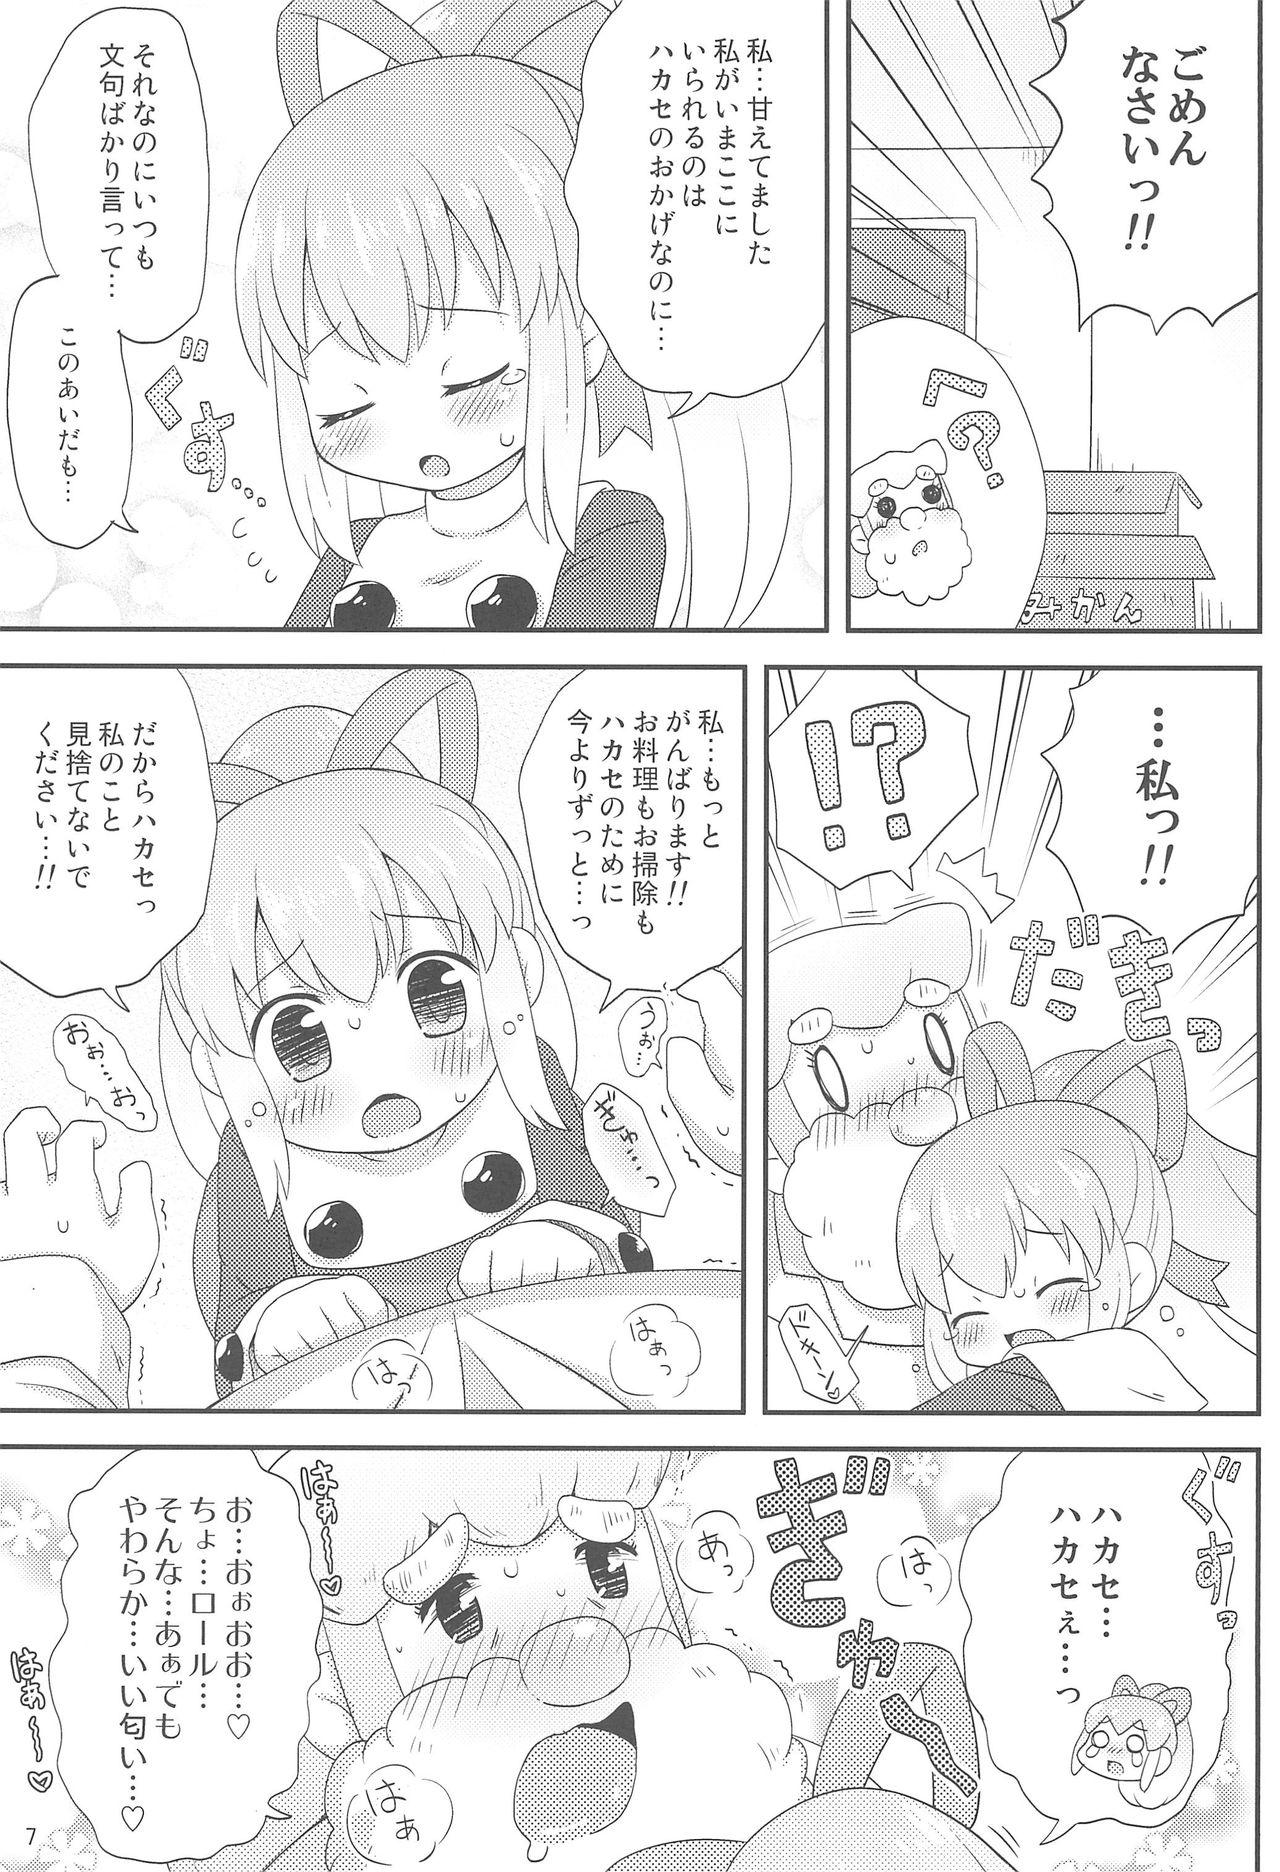 Best Blow Jobs Ever (Puniket 27) [Momomoya (Mizuno Mumomo)] Roll-chan to Issho! -Together with Roll- (Megaman) - Megaman Mama - Page 9